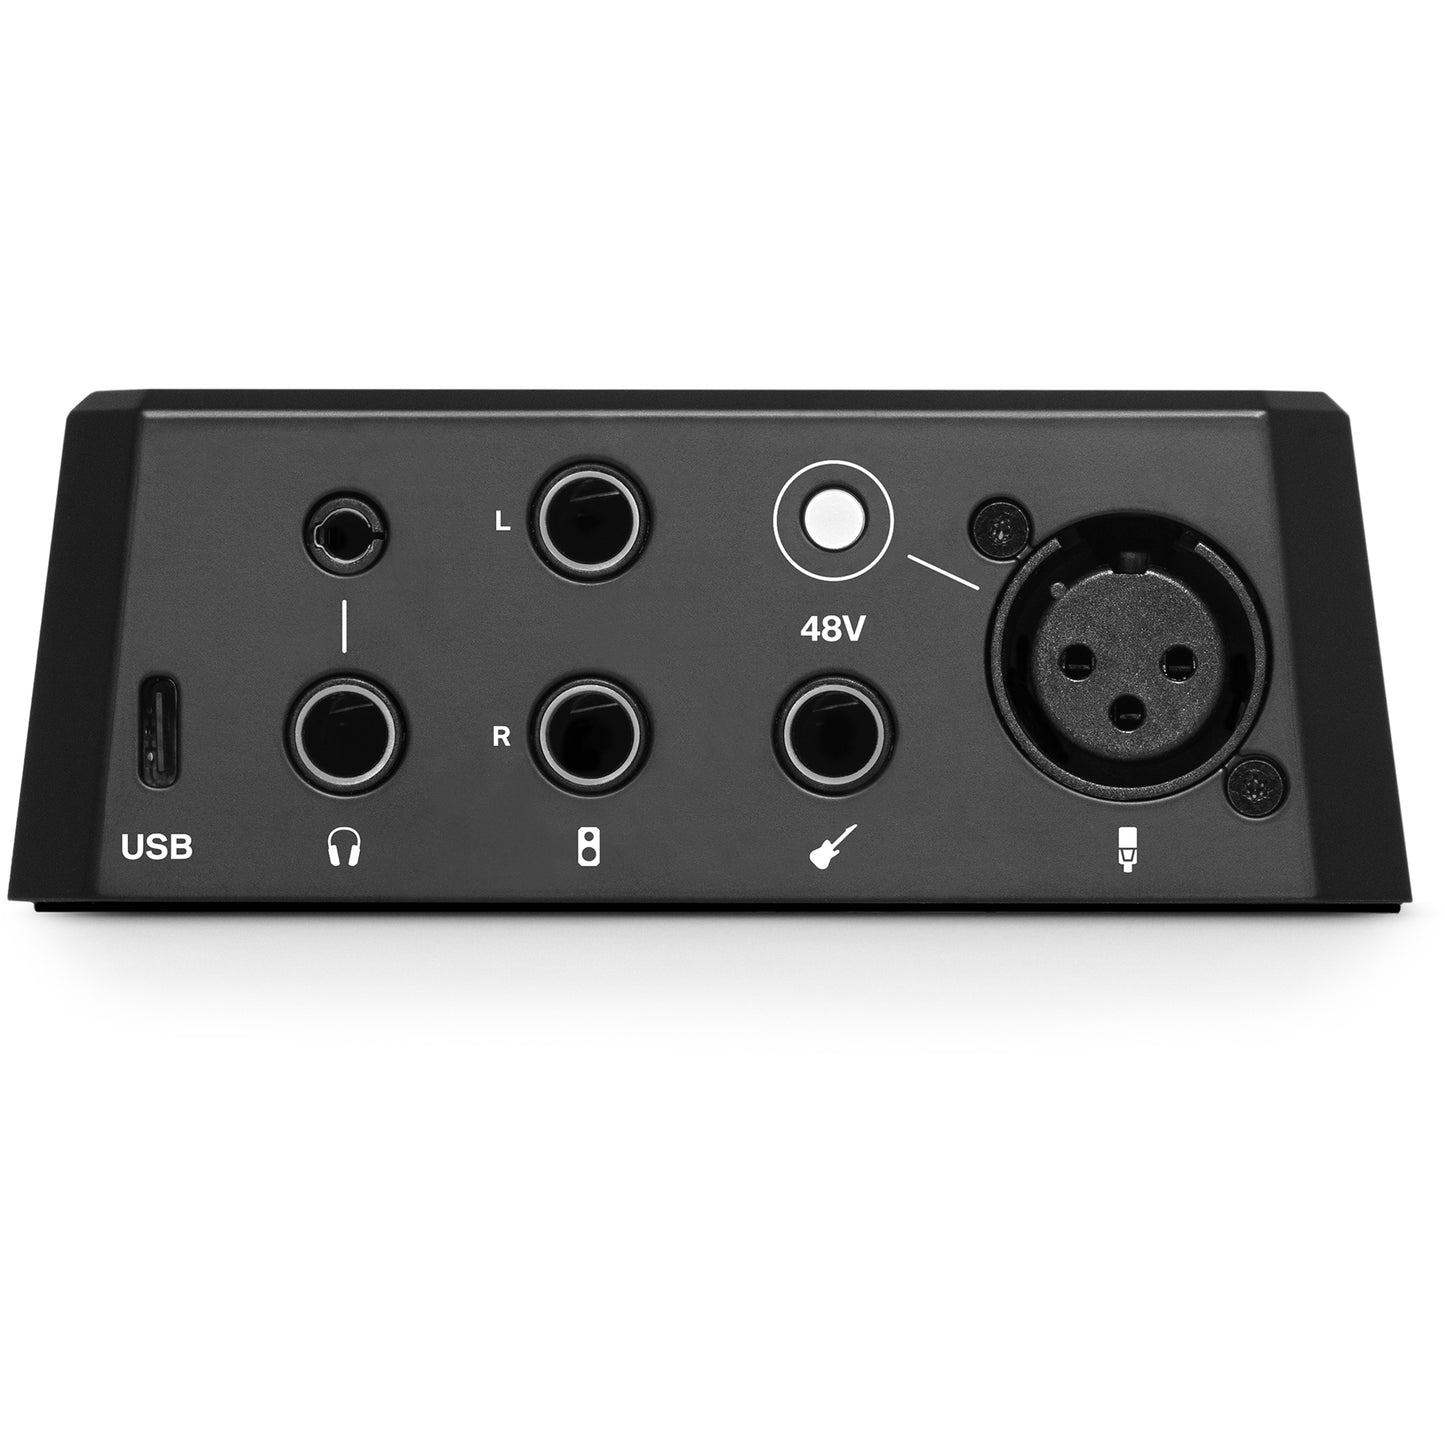 CONNECT 2 – The most user-friendly Audio Interface with XLR and Hi-Z input - Sound sensational with just a few Clicks – Autosetup, Clipguard, Compressor, Denoiser - 3 Preamp Sounds